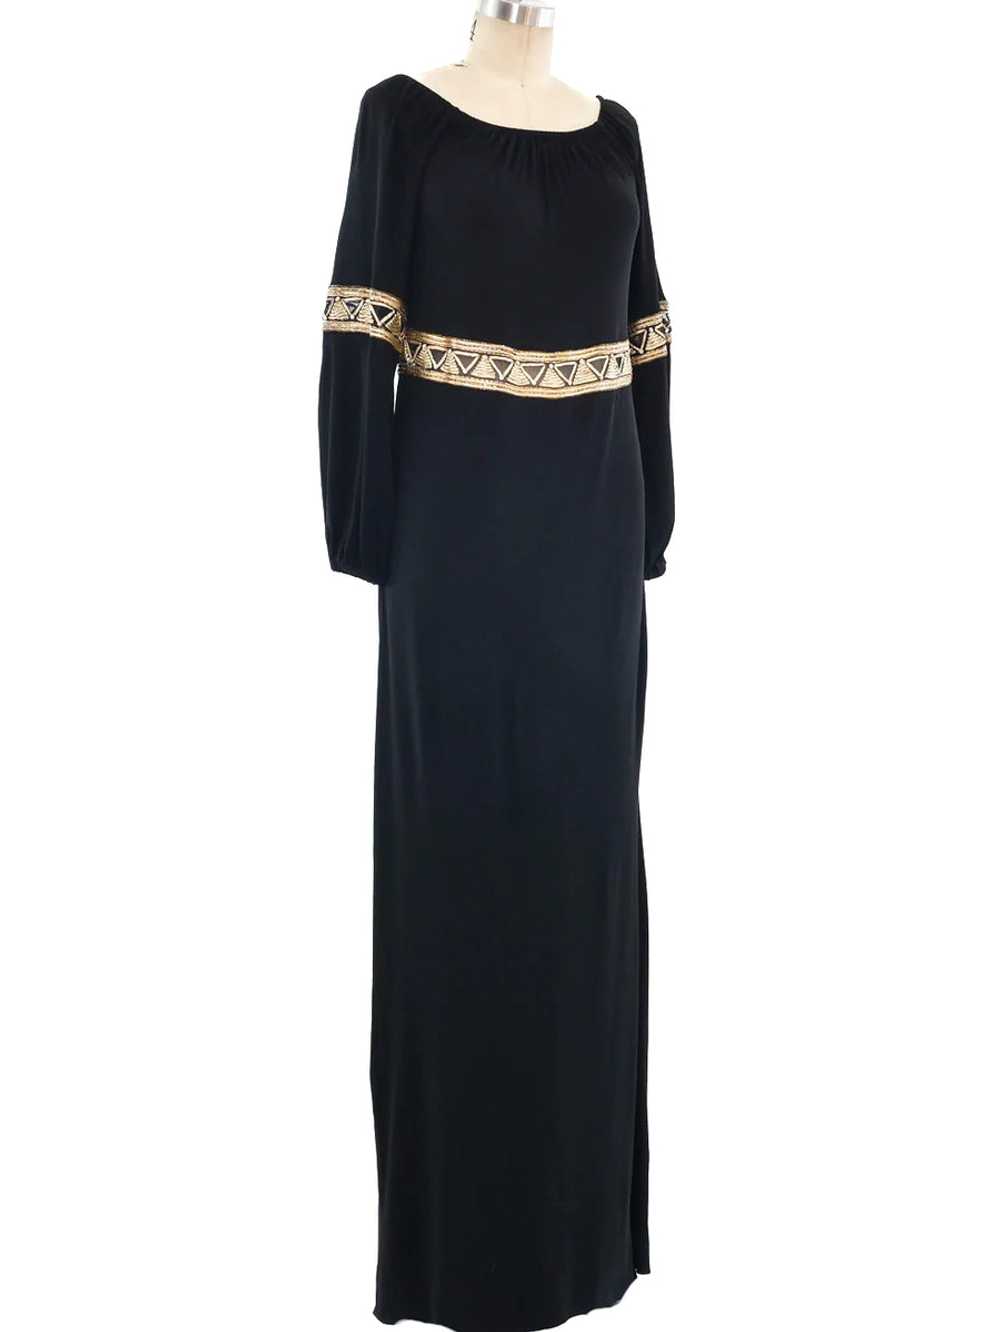 Givenchy Metallic Trimmed Jersey Goddess Gown - image 2